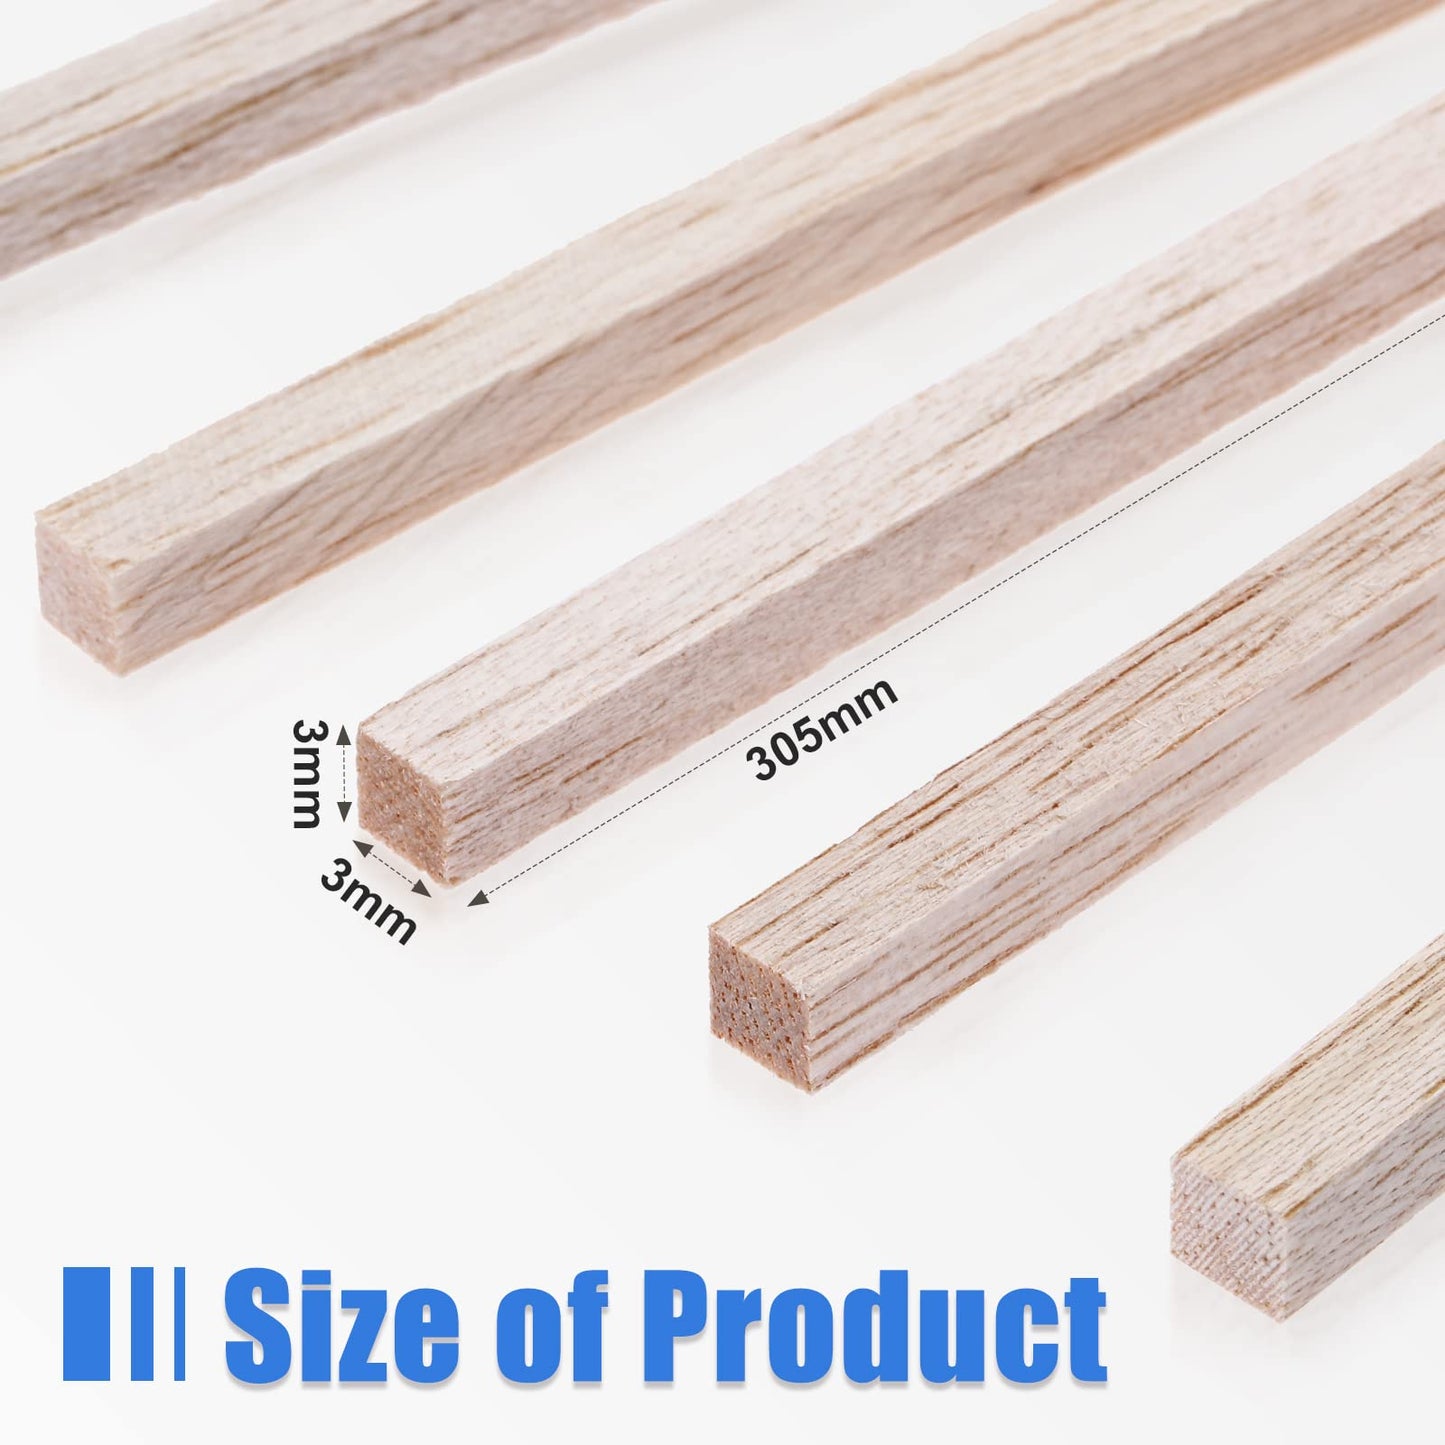 Balsa Wood Sticks 1/8 x 1/8 x 12 Inch Hardwood Square Dowels Unfinished Wooden Strips for DIY Molding Crafts Projects Making (150 Pieces)